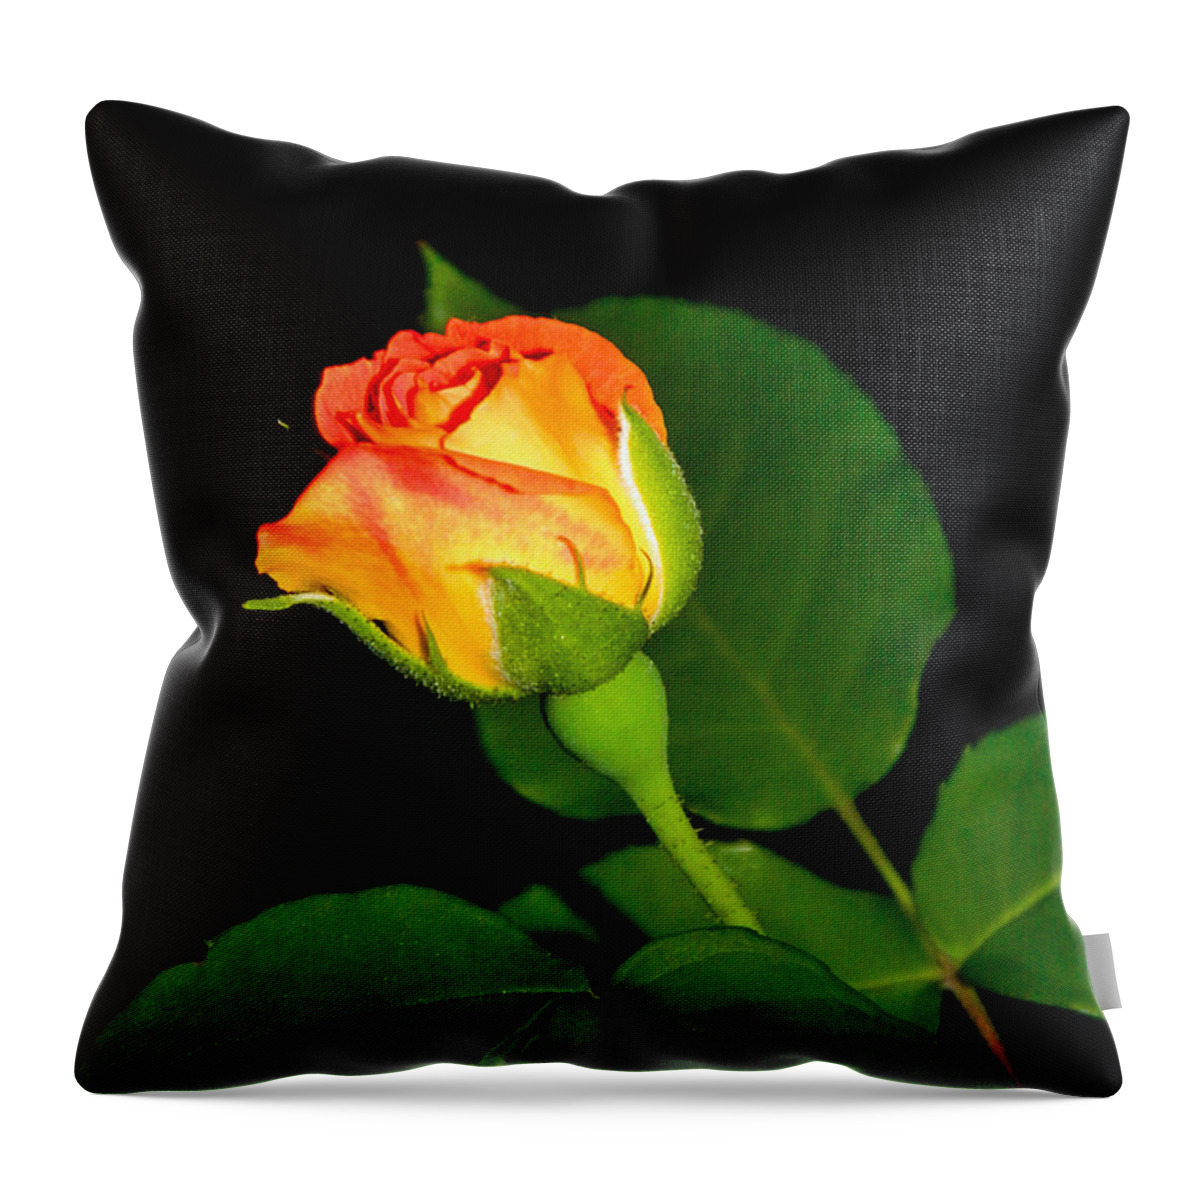 Background Throw Pillow featuring the photograph To My Beloved by Ester McGuire